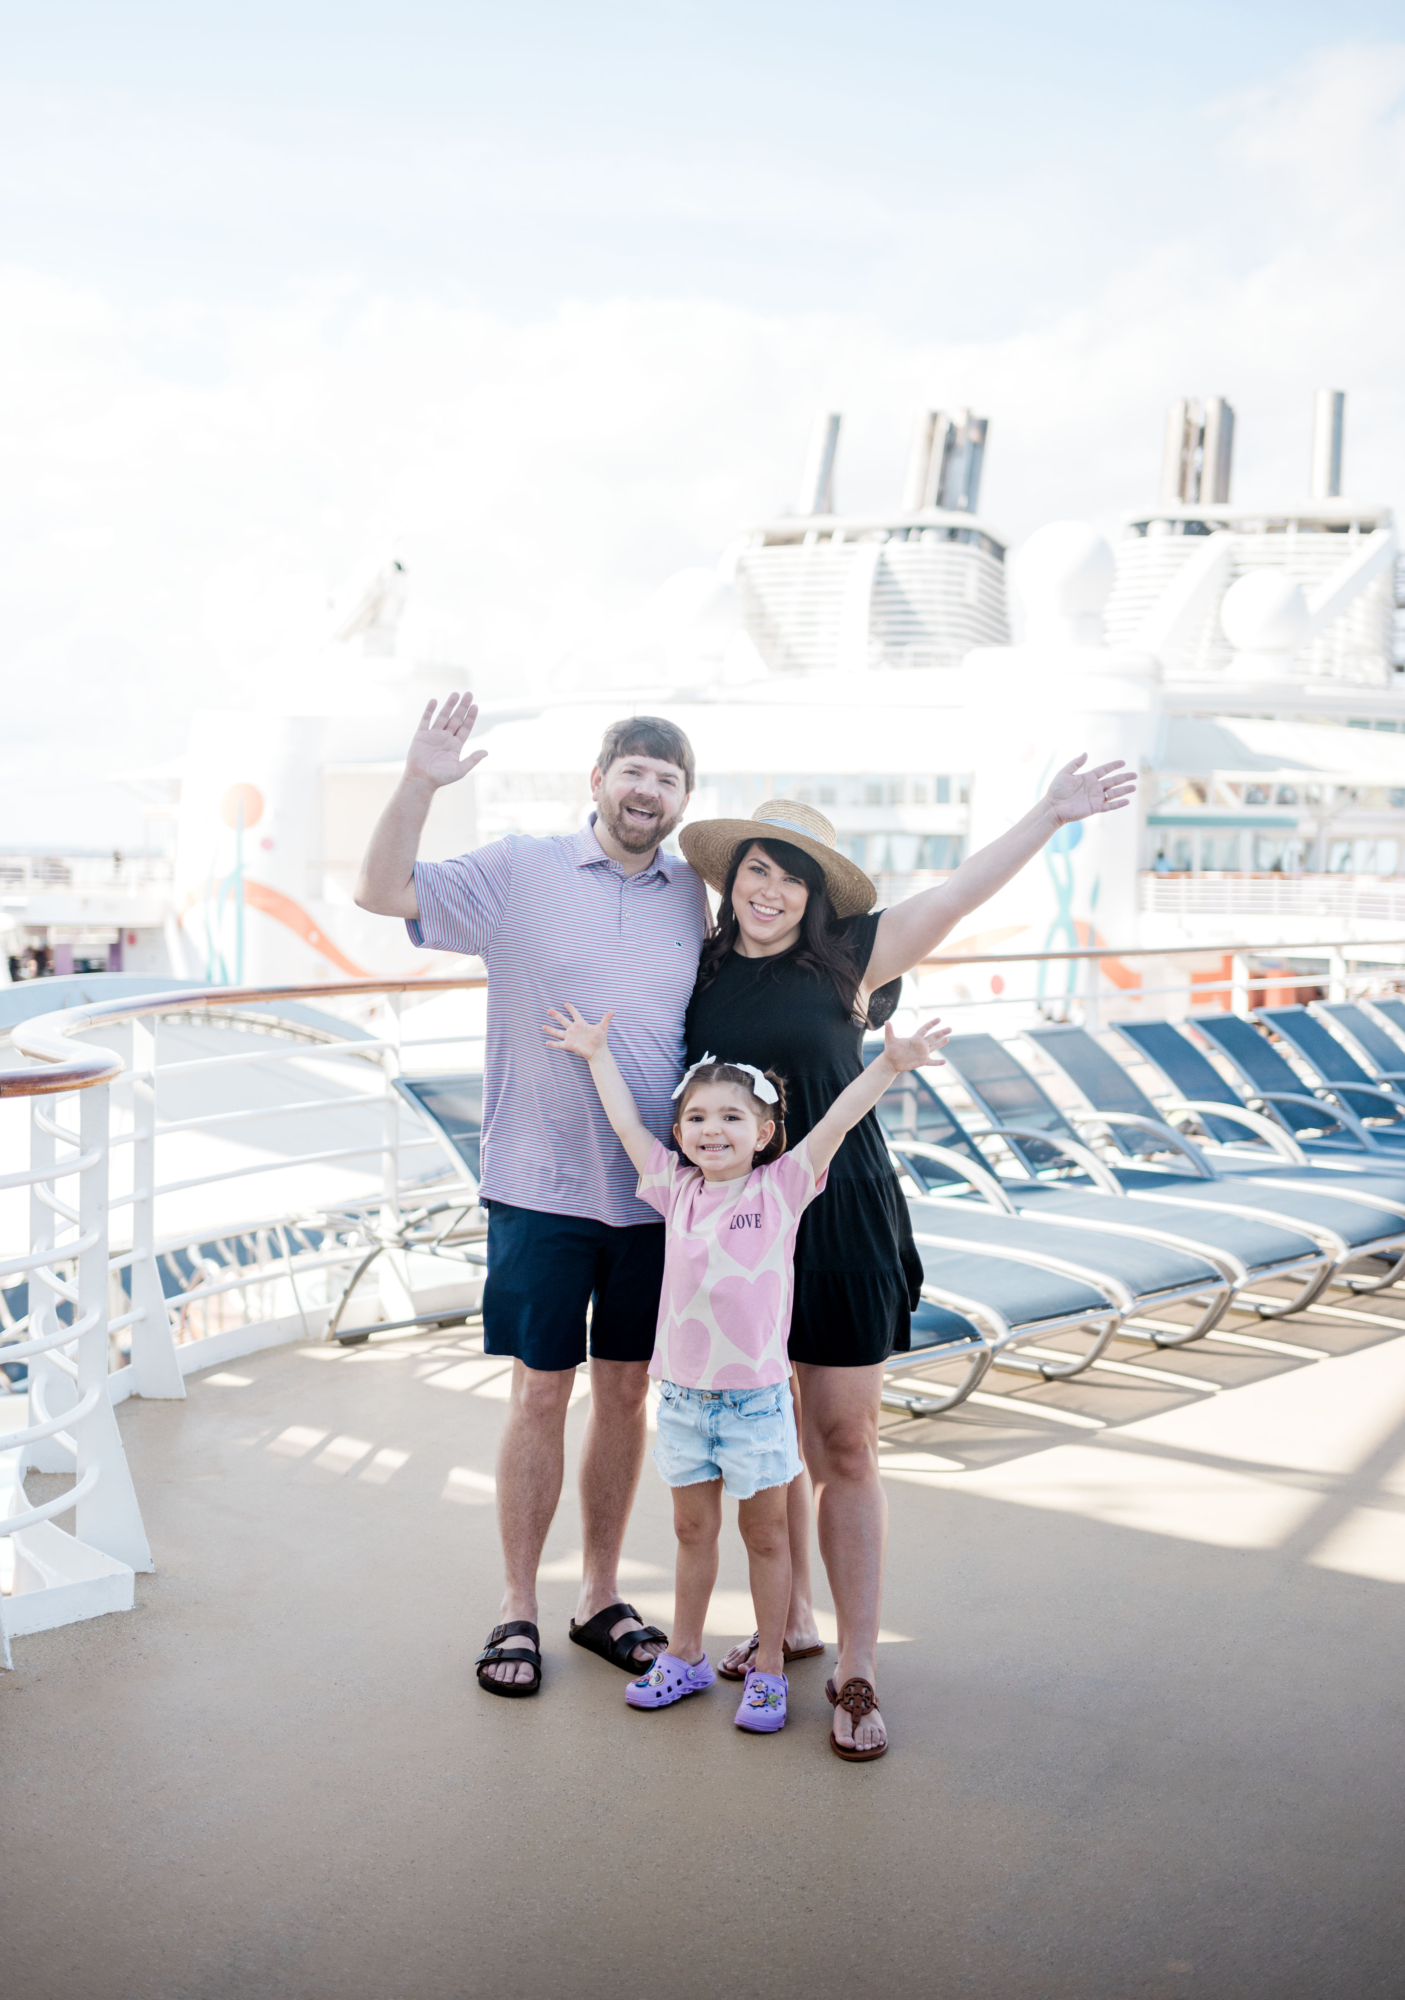 Amazon Cruise Essentials for Families--The Naylor family on board a Royal Caribbean Cruise deck with their arms up in the air. Stress-free cruising with Kids.